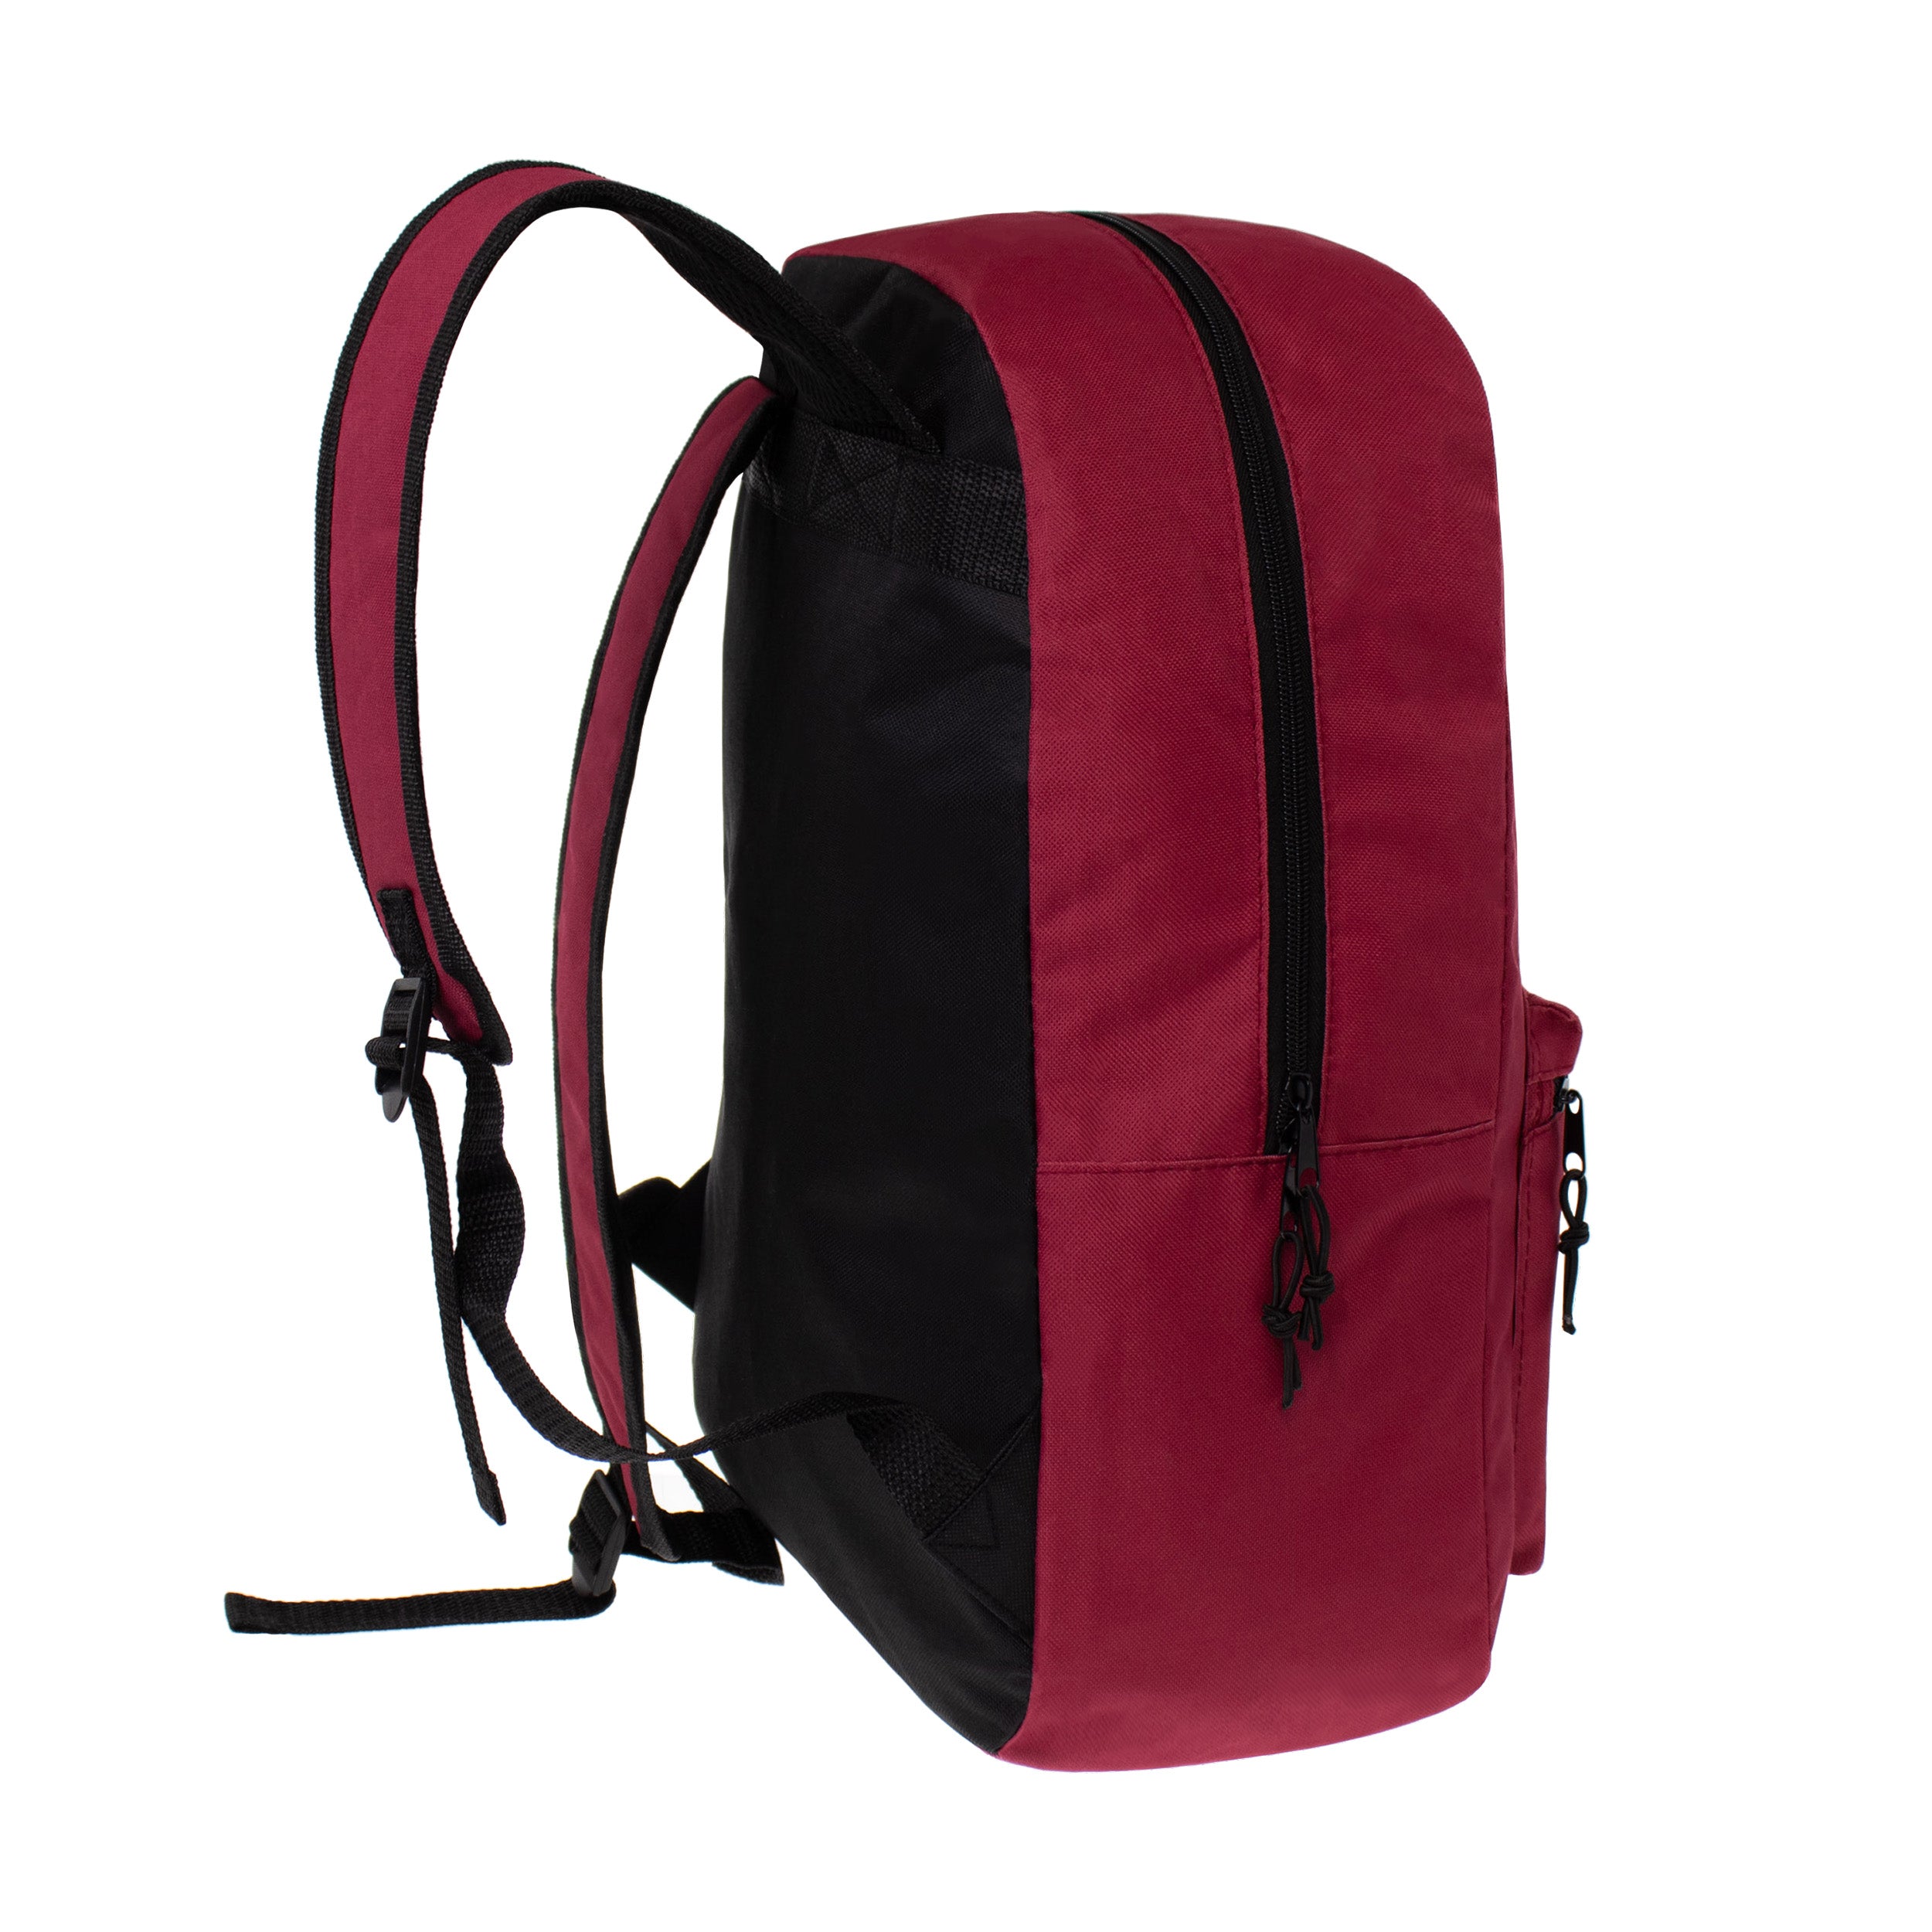 17 Combo Set Of School Wholesale Backpacks with Free Pencil Pouches